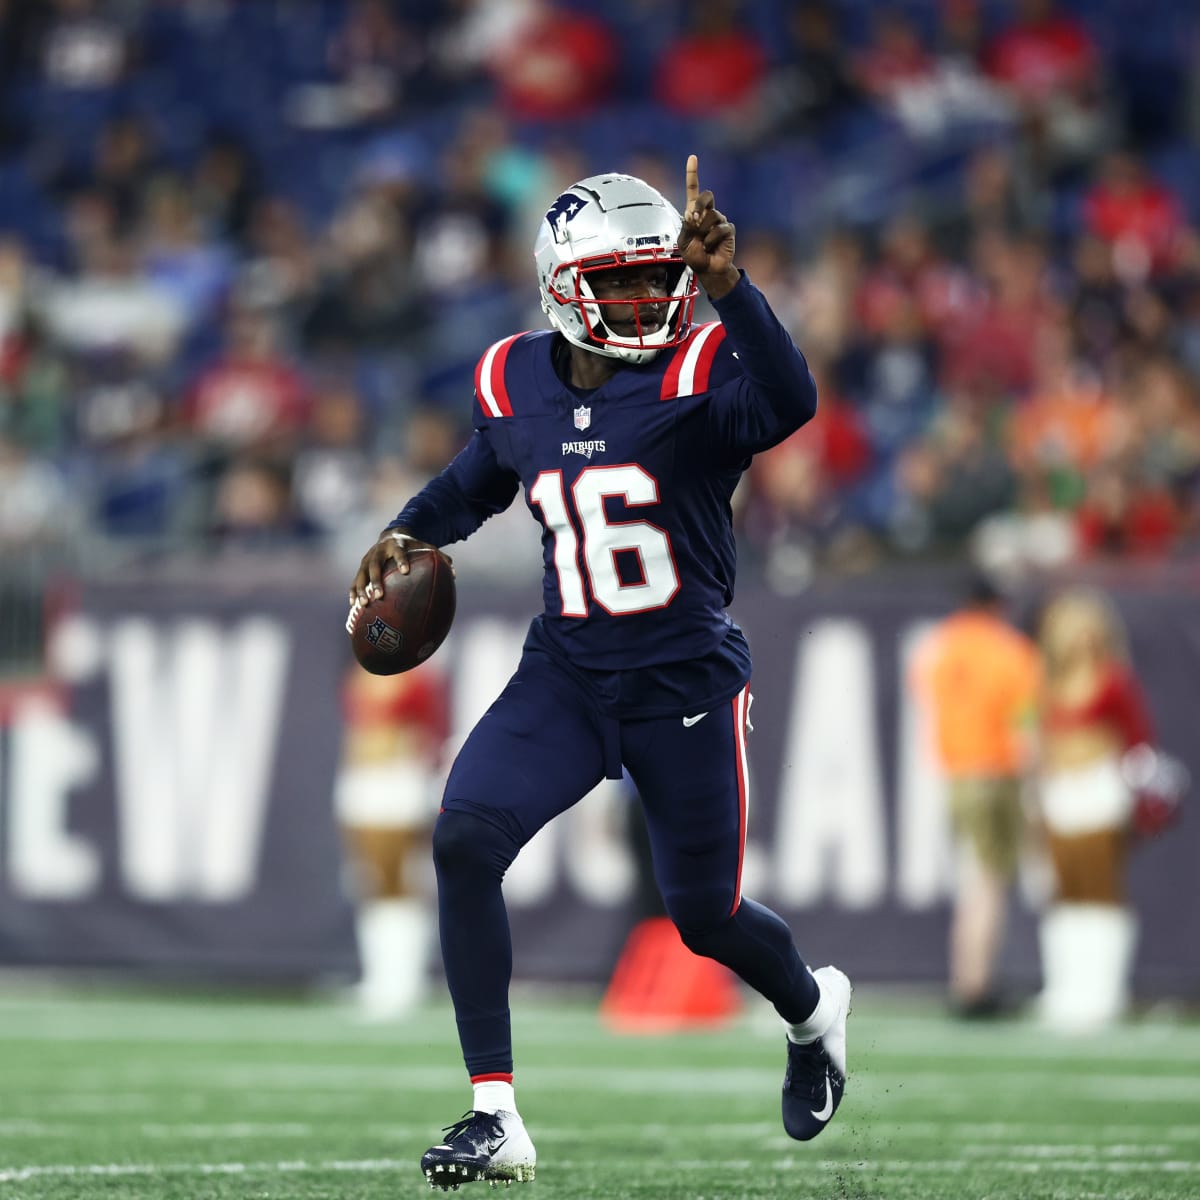 Patriots Signed Two Quarterbacks To Their Practice Squad Today